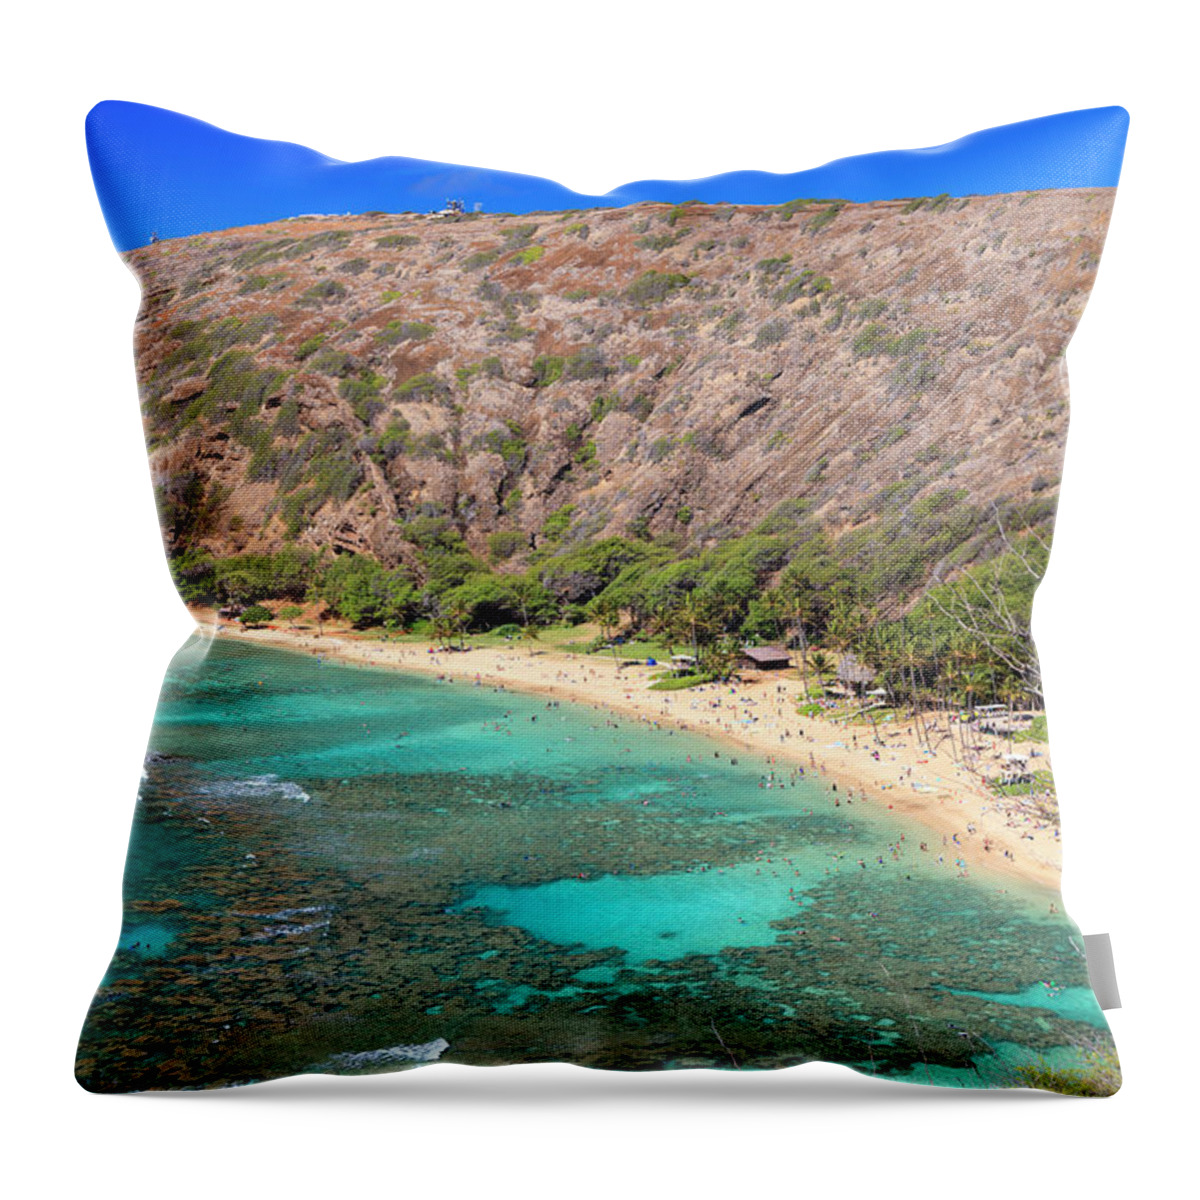 Tranquility Throw Pillow featuring the photograph Hawaii, Oahu, Tropical Beach by Michele Falzone